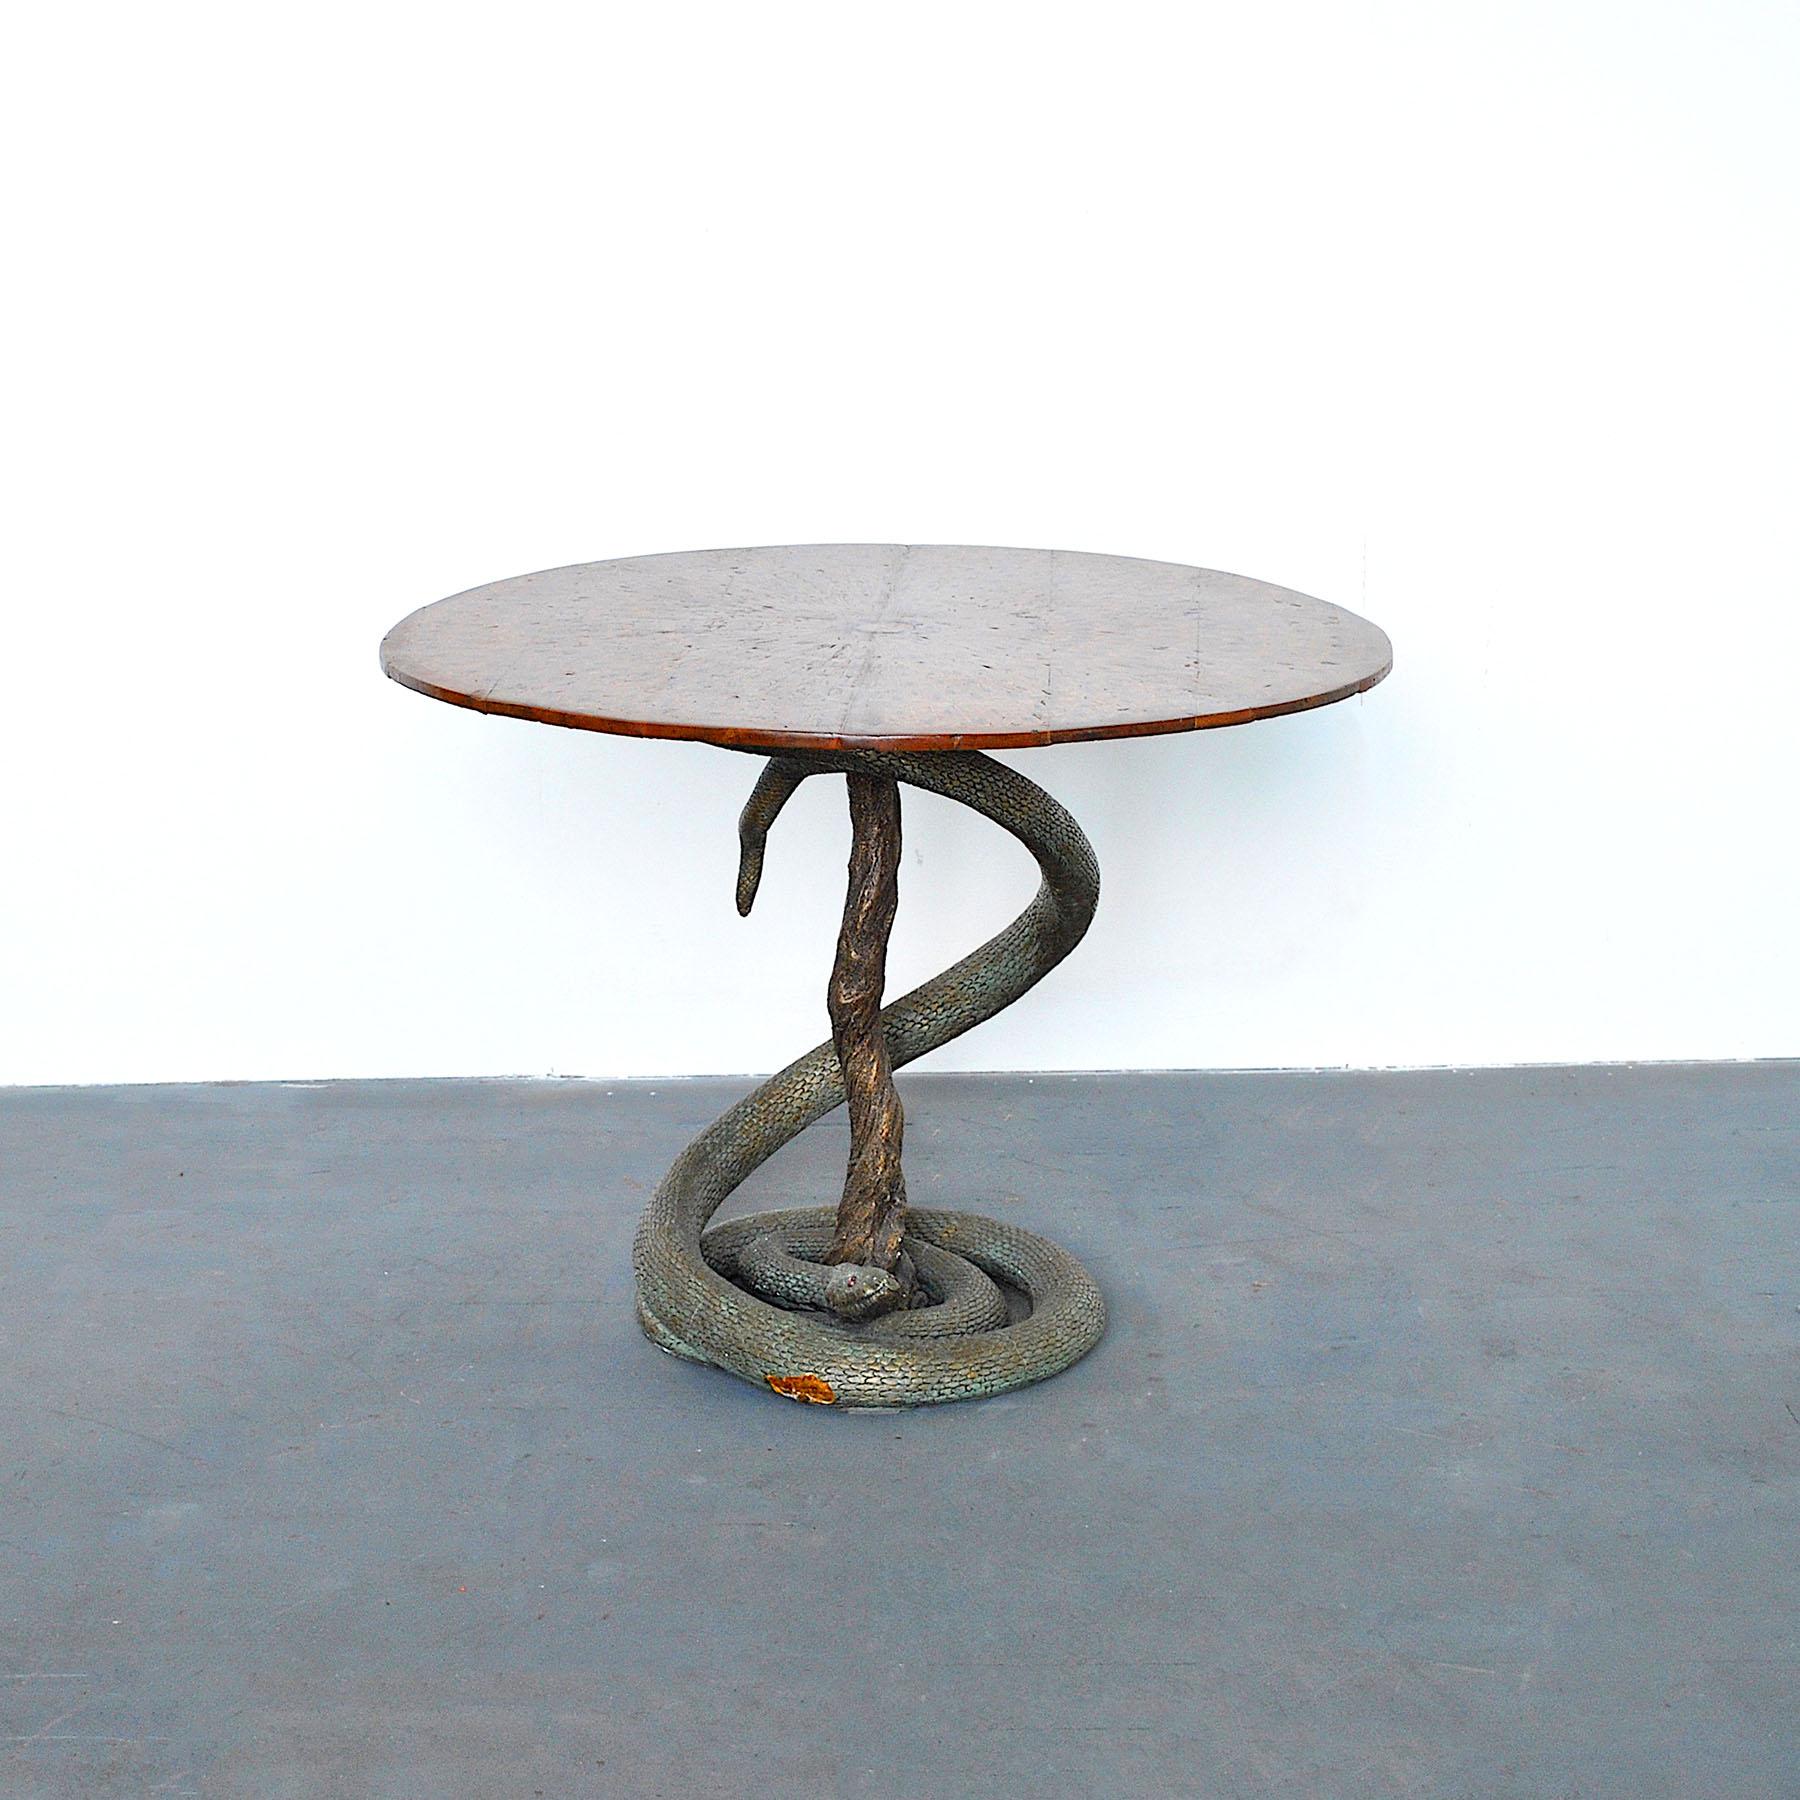 Mid-Century Modern Eclectic Game Table with Python Sculpture from the Fifties For Sale